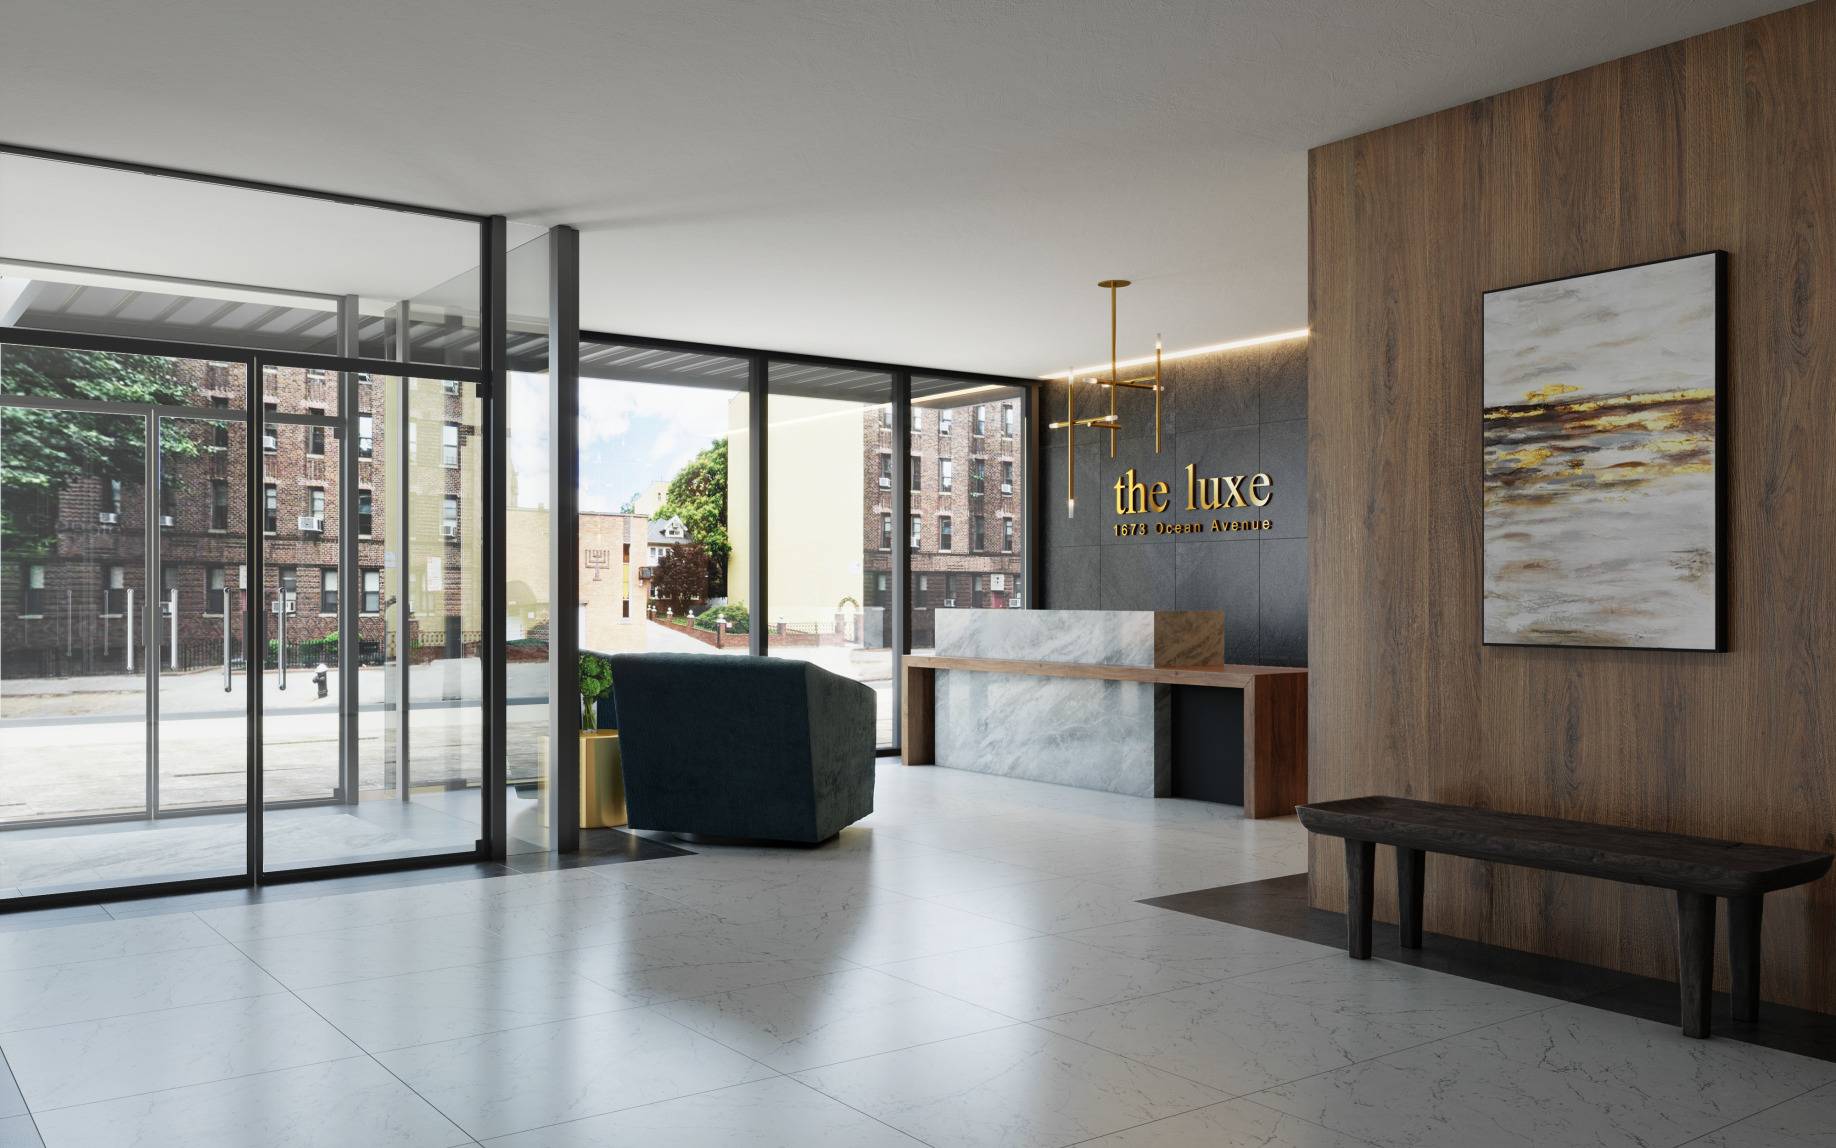 Welcome to The Luxe Condominium, a ground up new development where timeless elegance meets undeniable value.